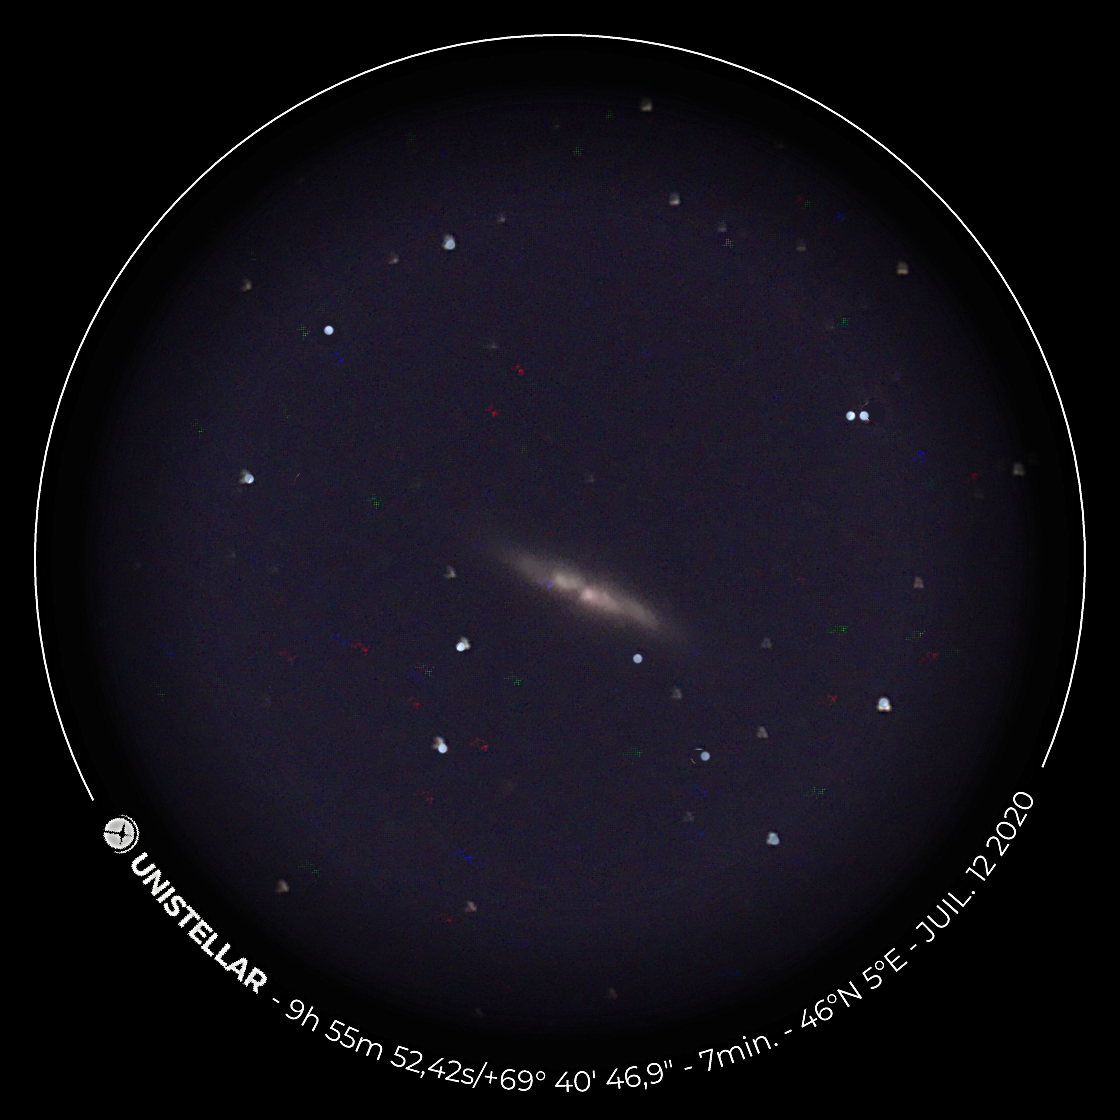 eVscope-20200712-022456 (3).png